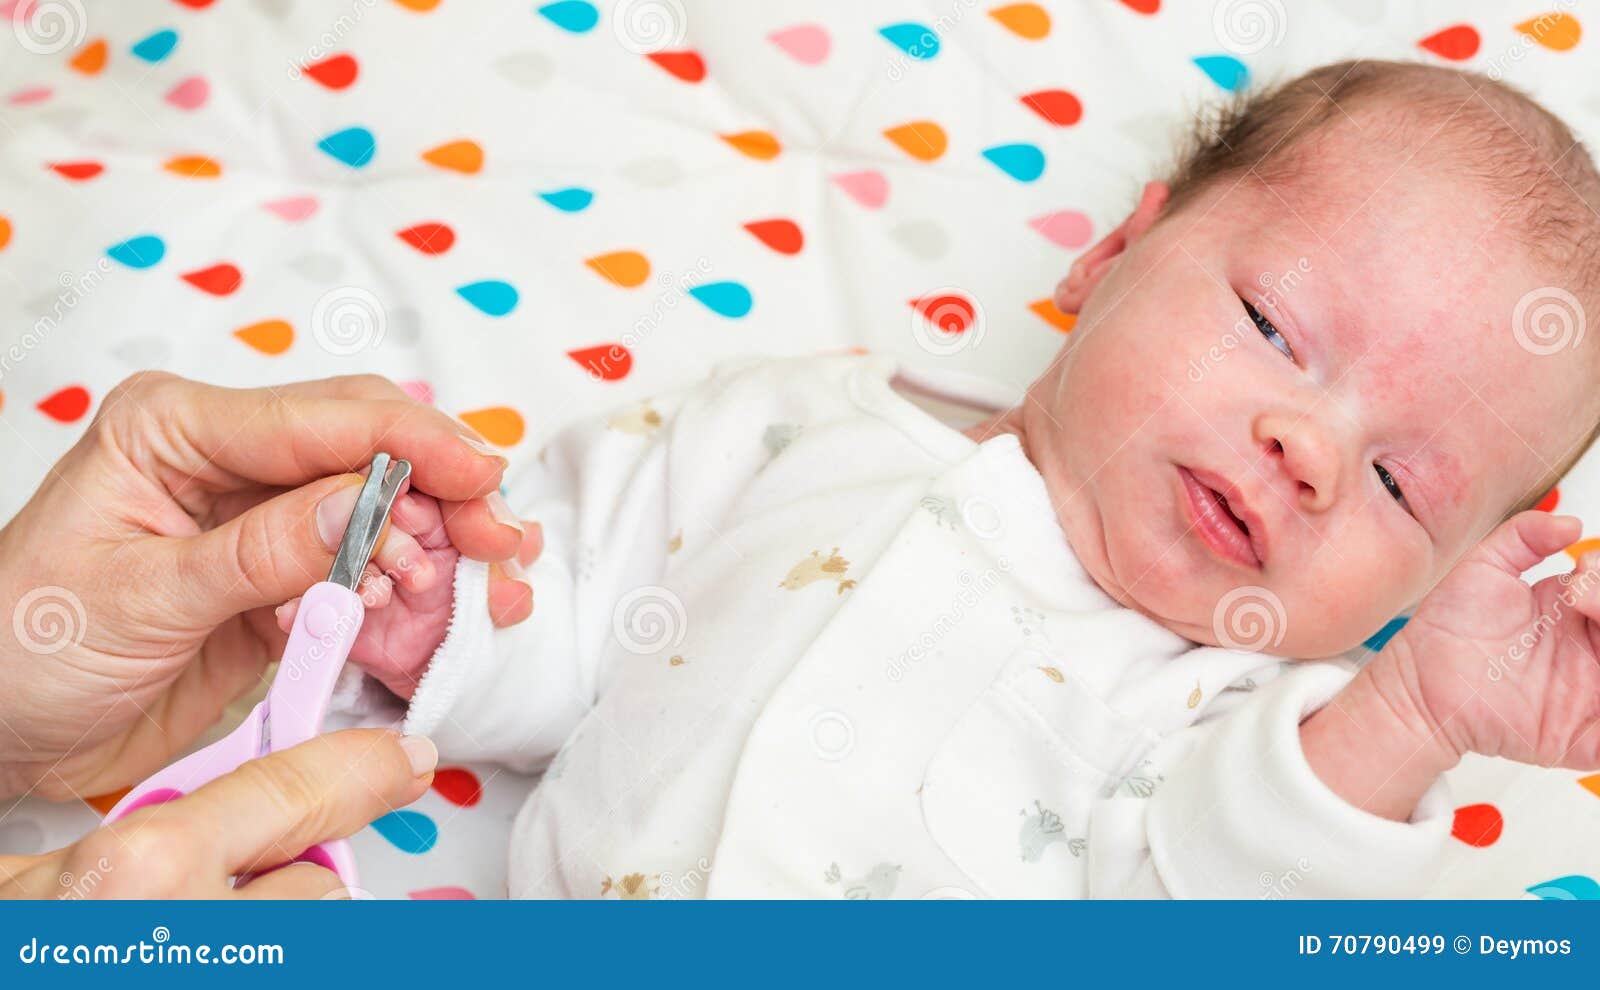 Mother Cutting Fingernails Of Her Newborn Baby Stock Image ...